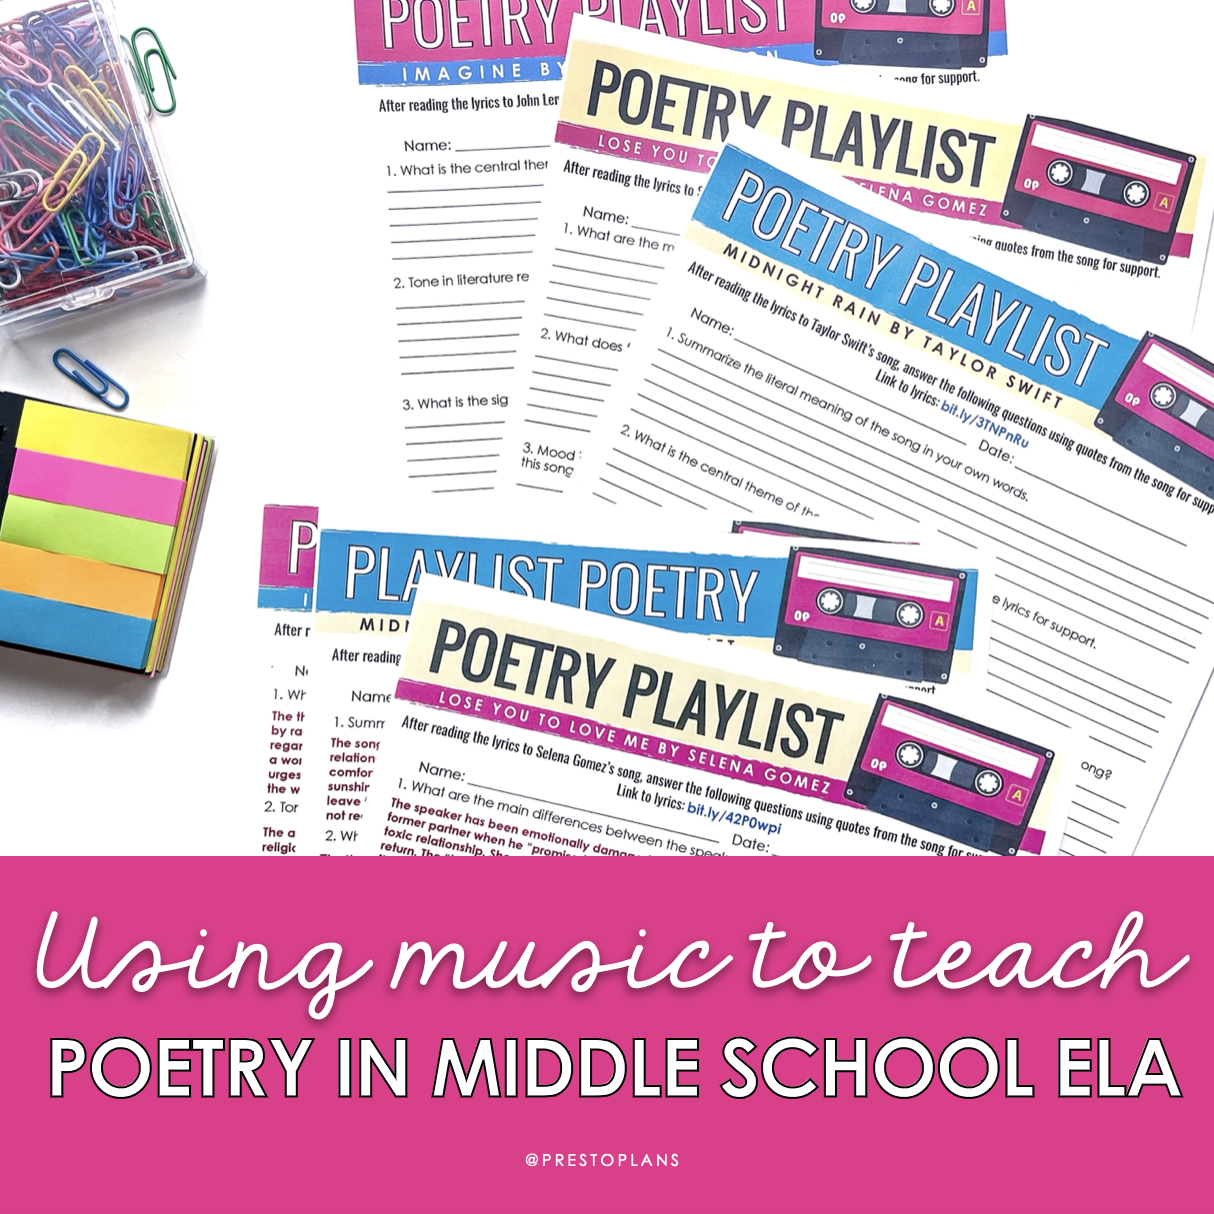 Using music in ELA class can make complex poetry lessons more accessible for students.